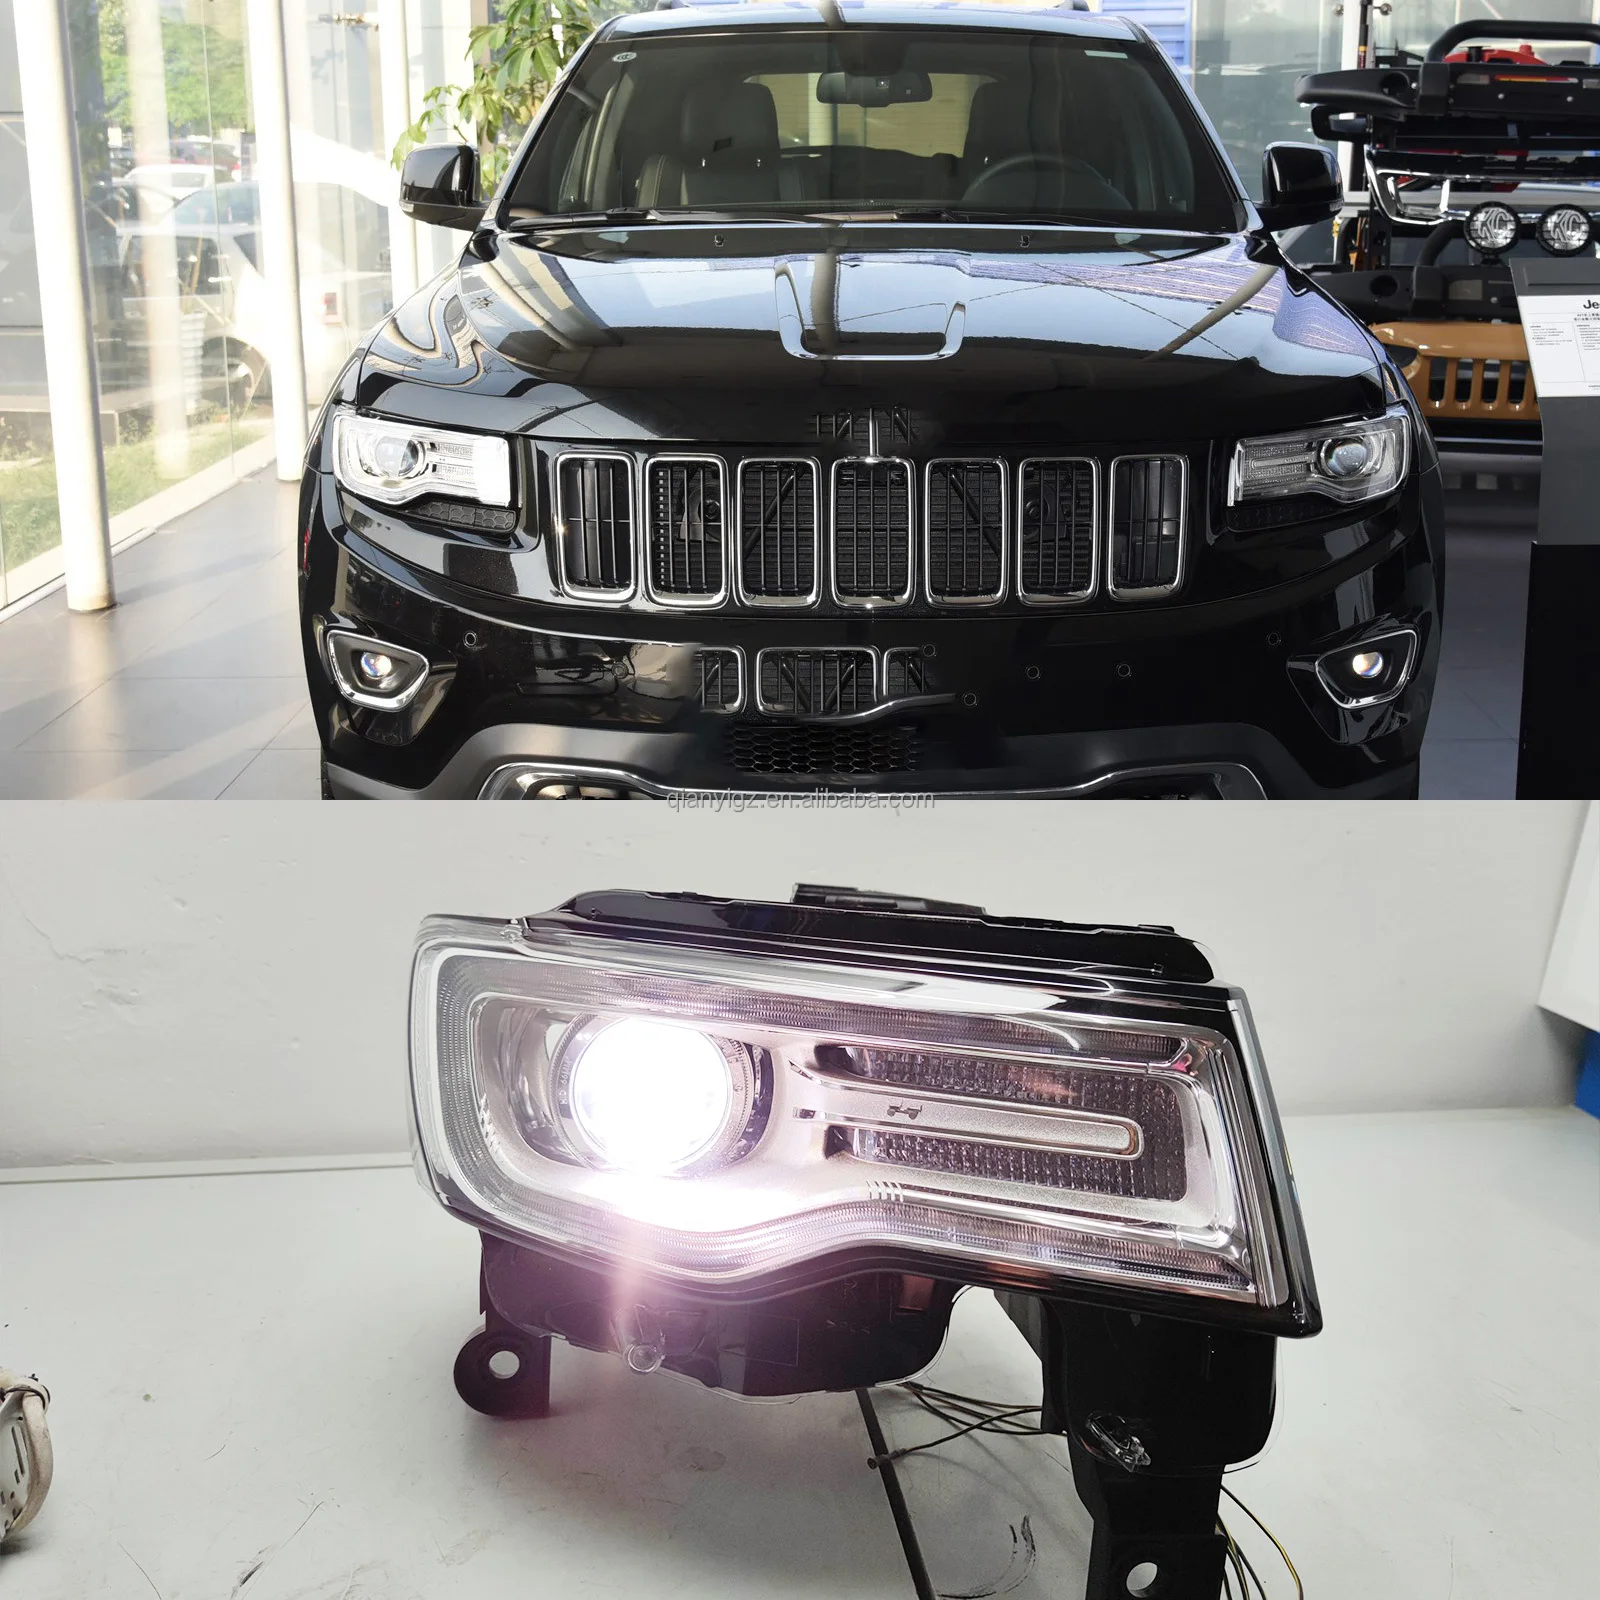 Compatible with 2016 Jeep Grand Cherokee xenon headlight LED daytime running lights original beam disassembly accessories